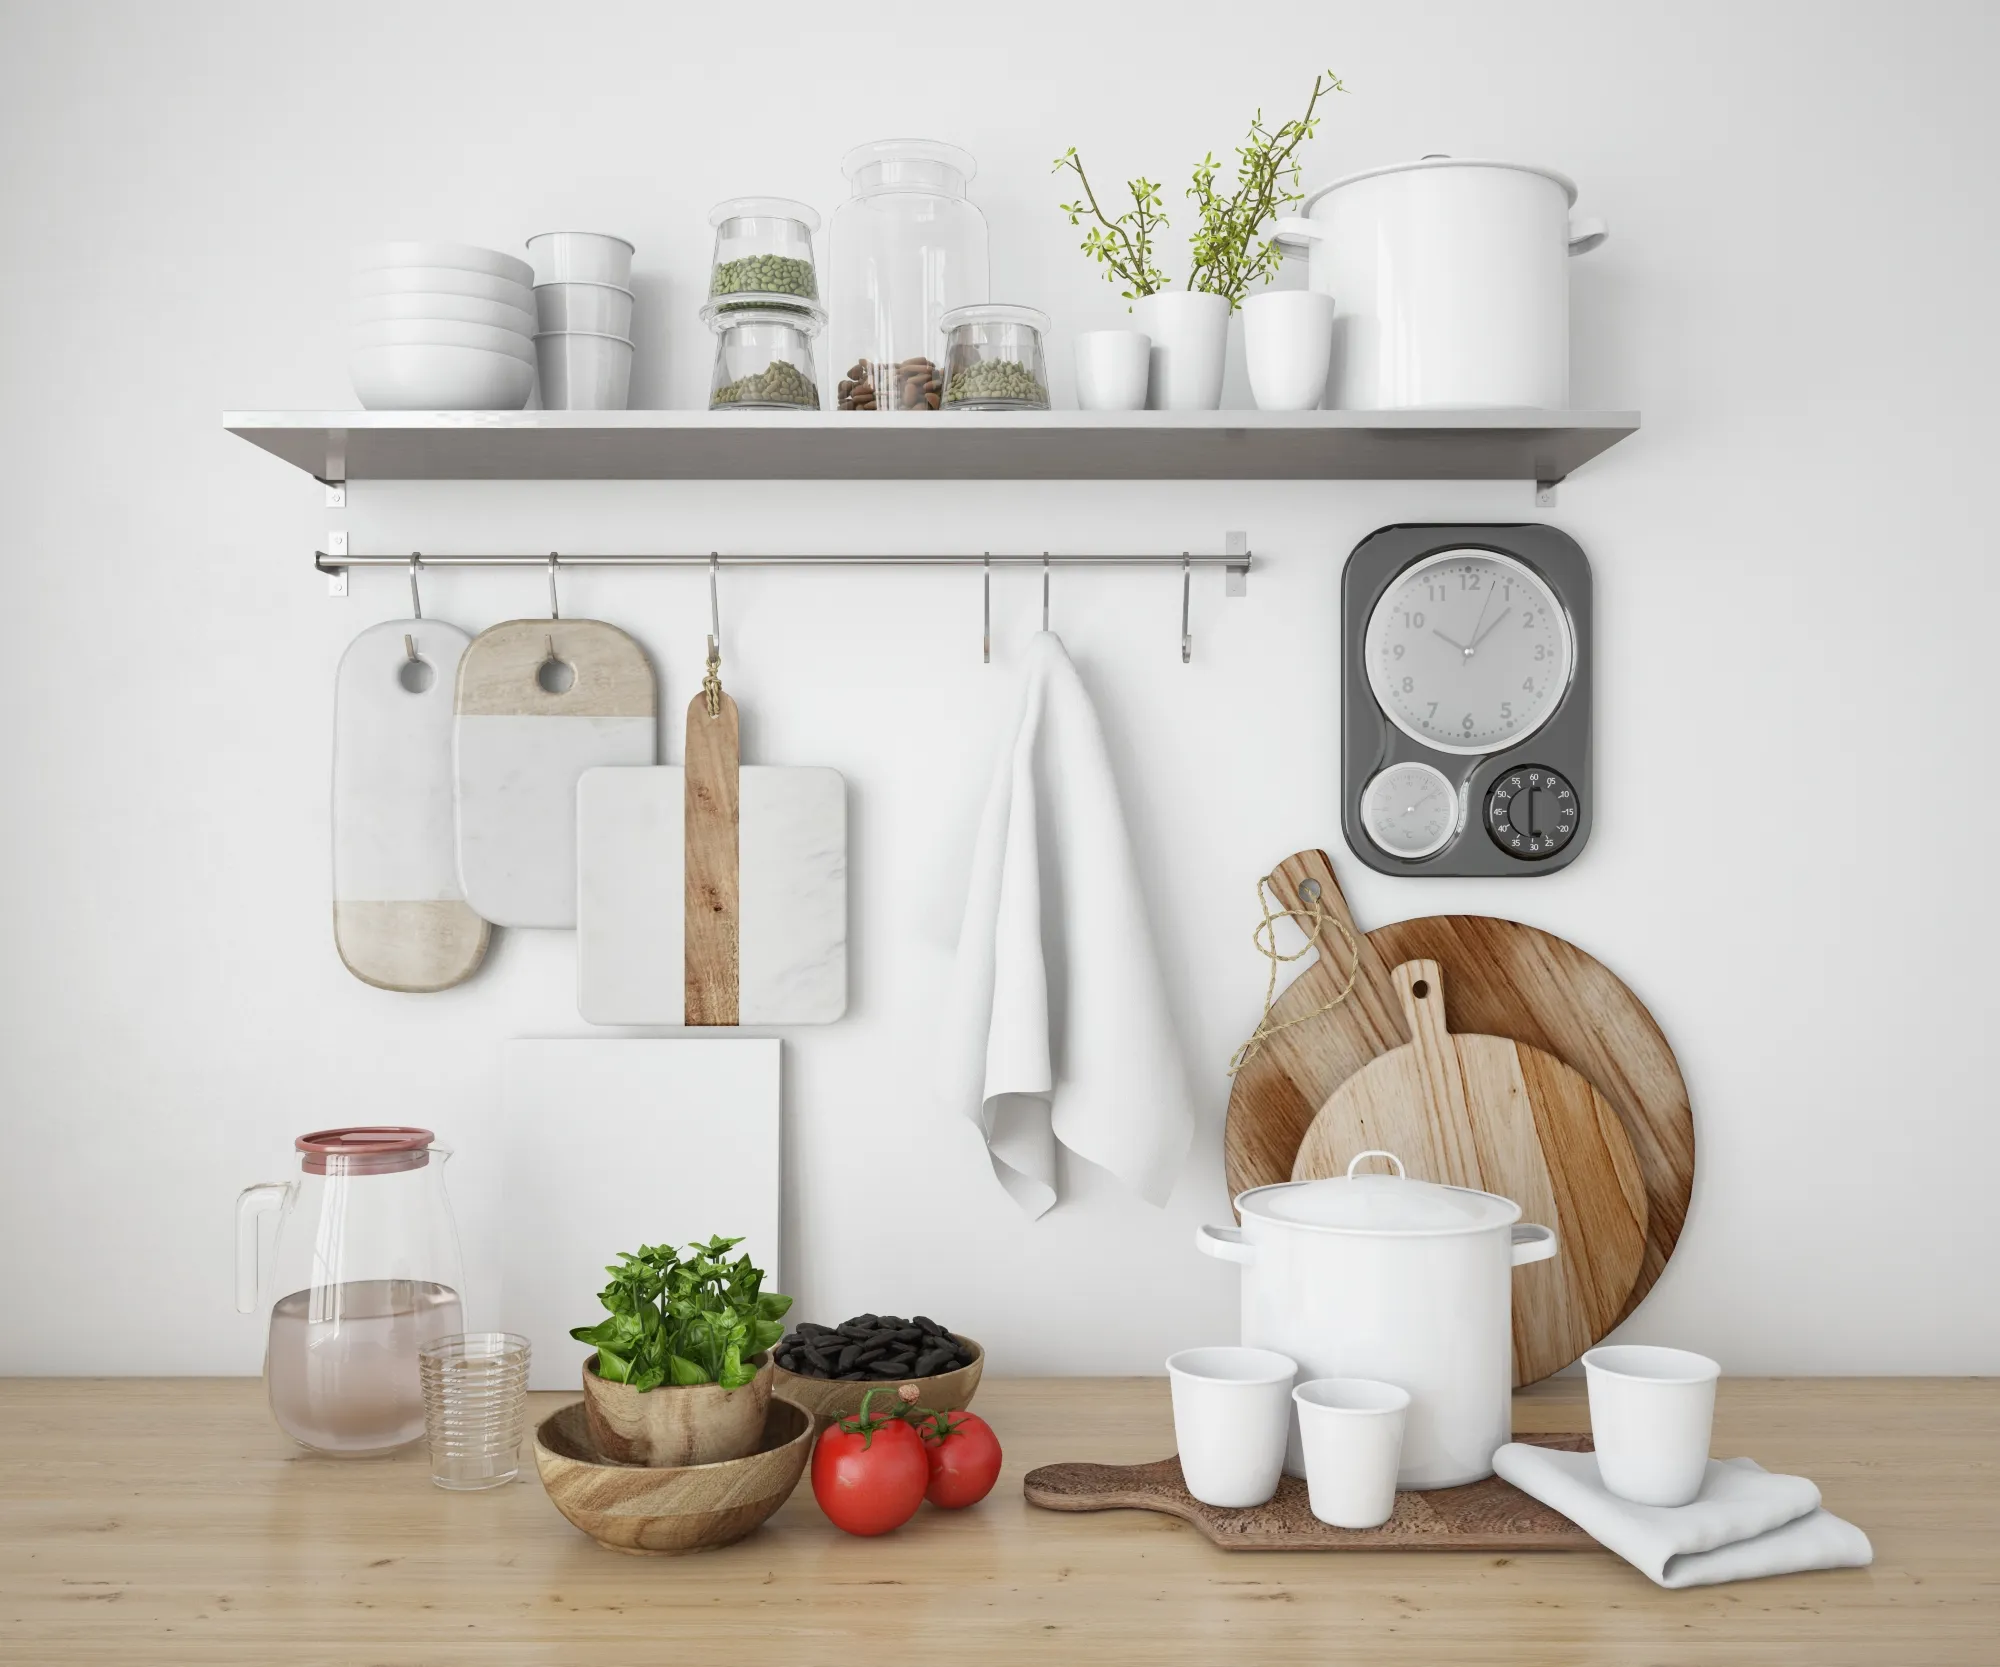 Hang your pots and pans from a ceiling or wall-mounted rack to help you have more countertops space.